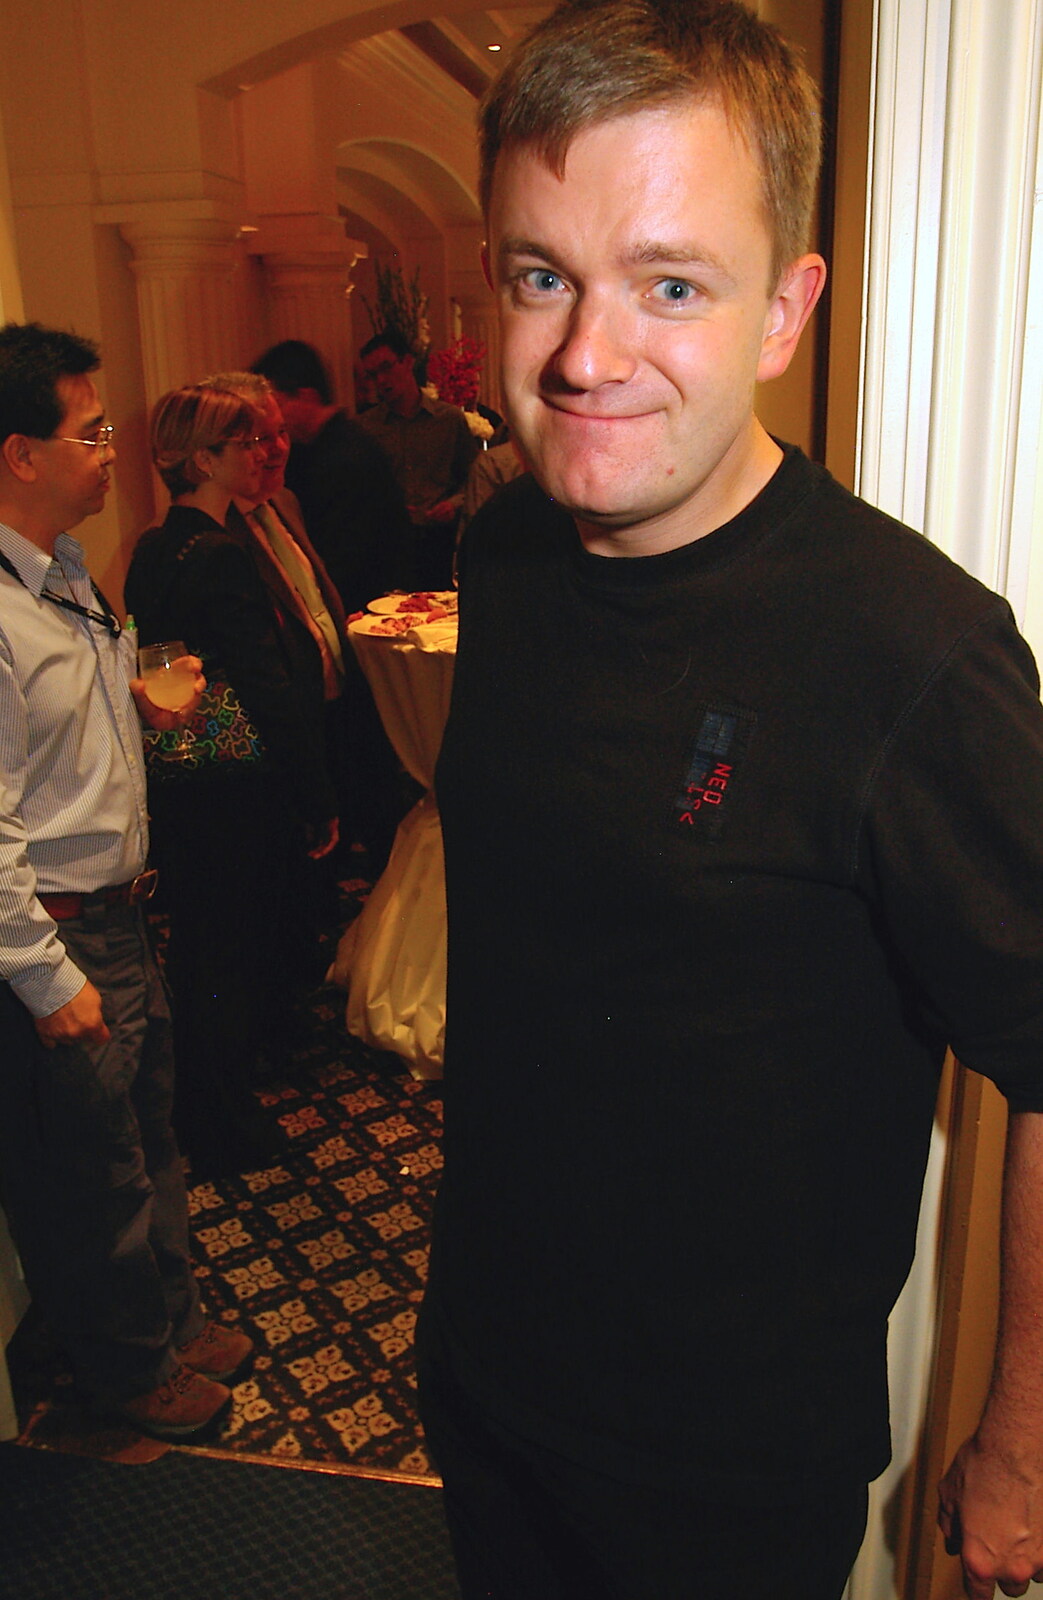 Nosher from Qualcomm Europe All-Hands at the Berkeley Hotel, London - 9th November 2005